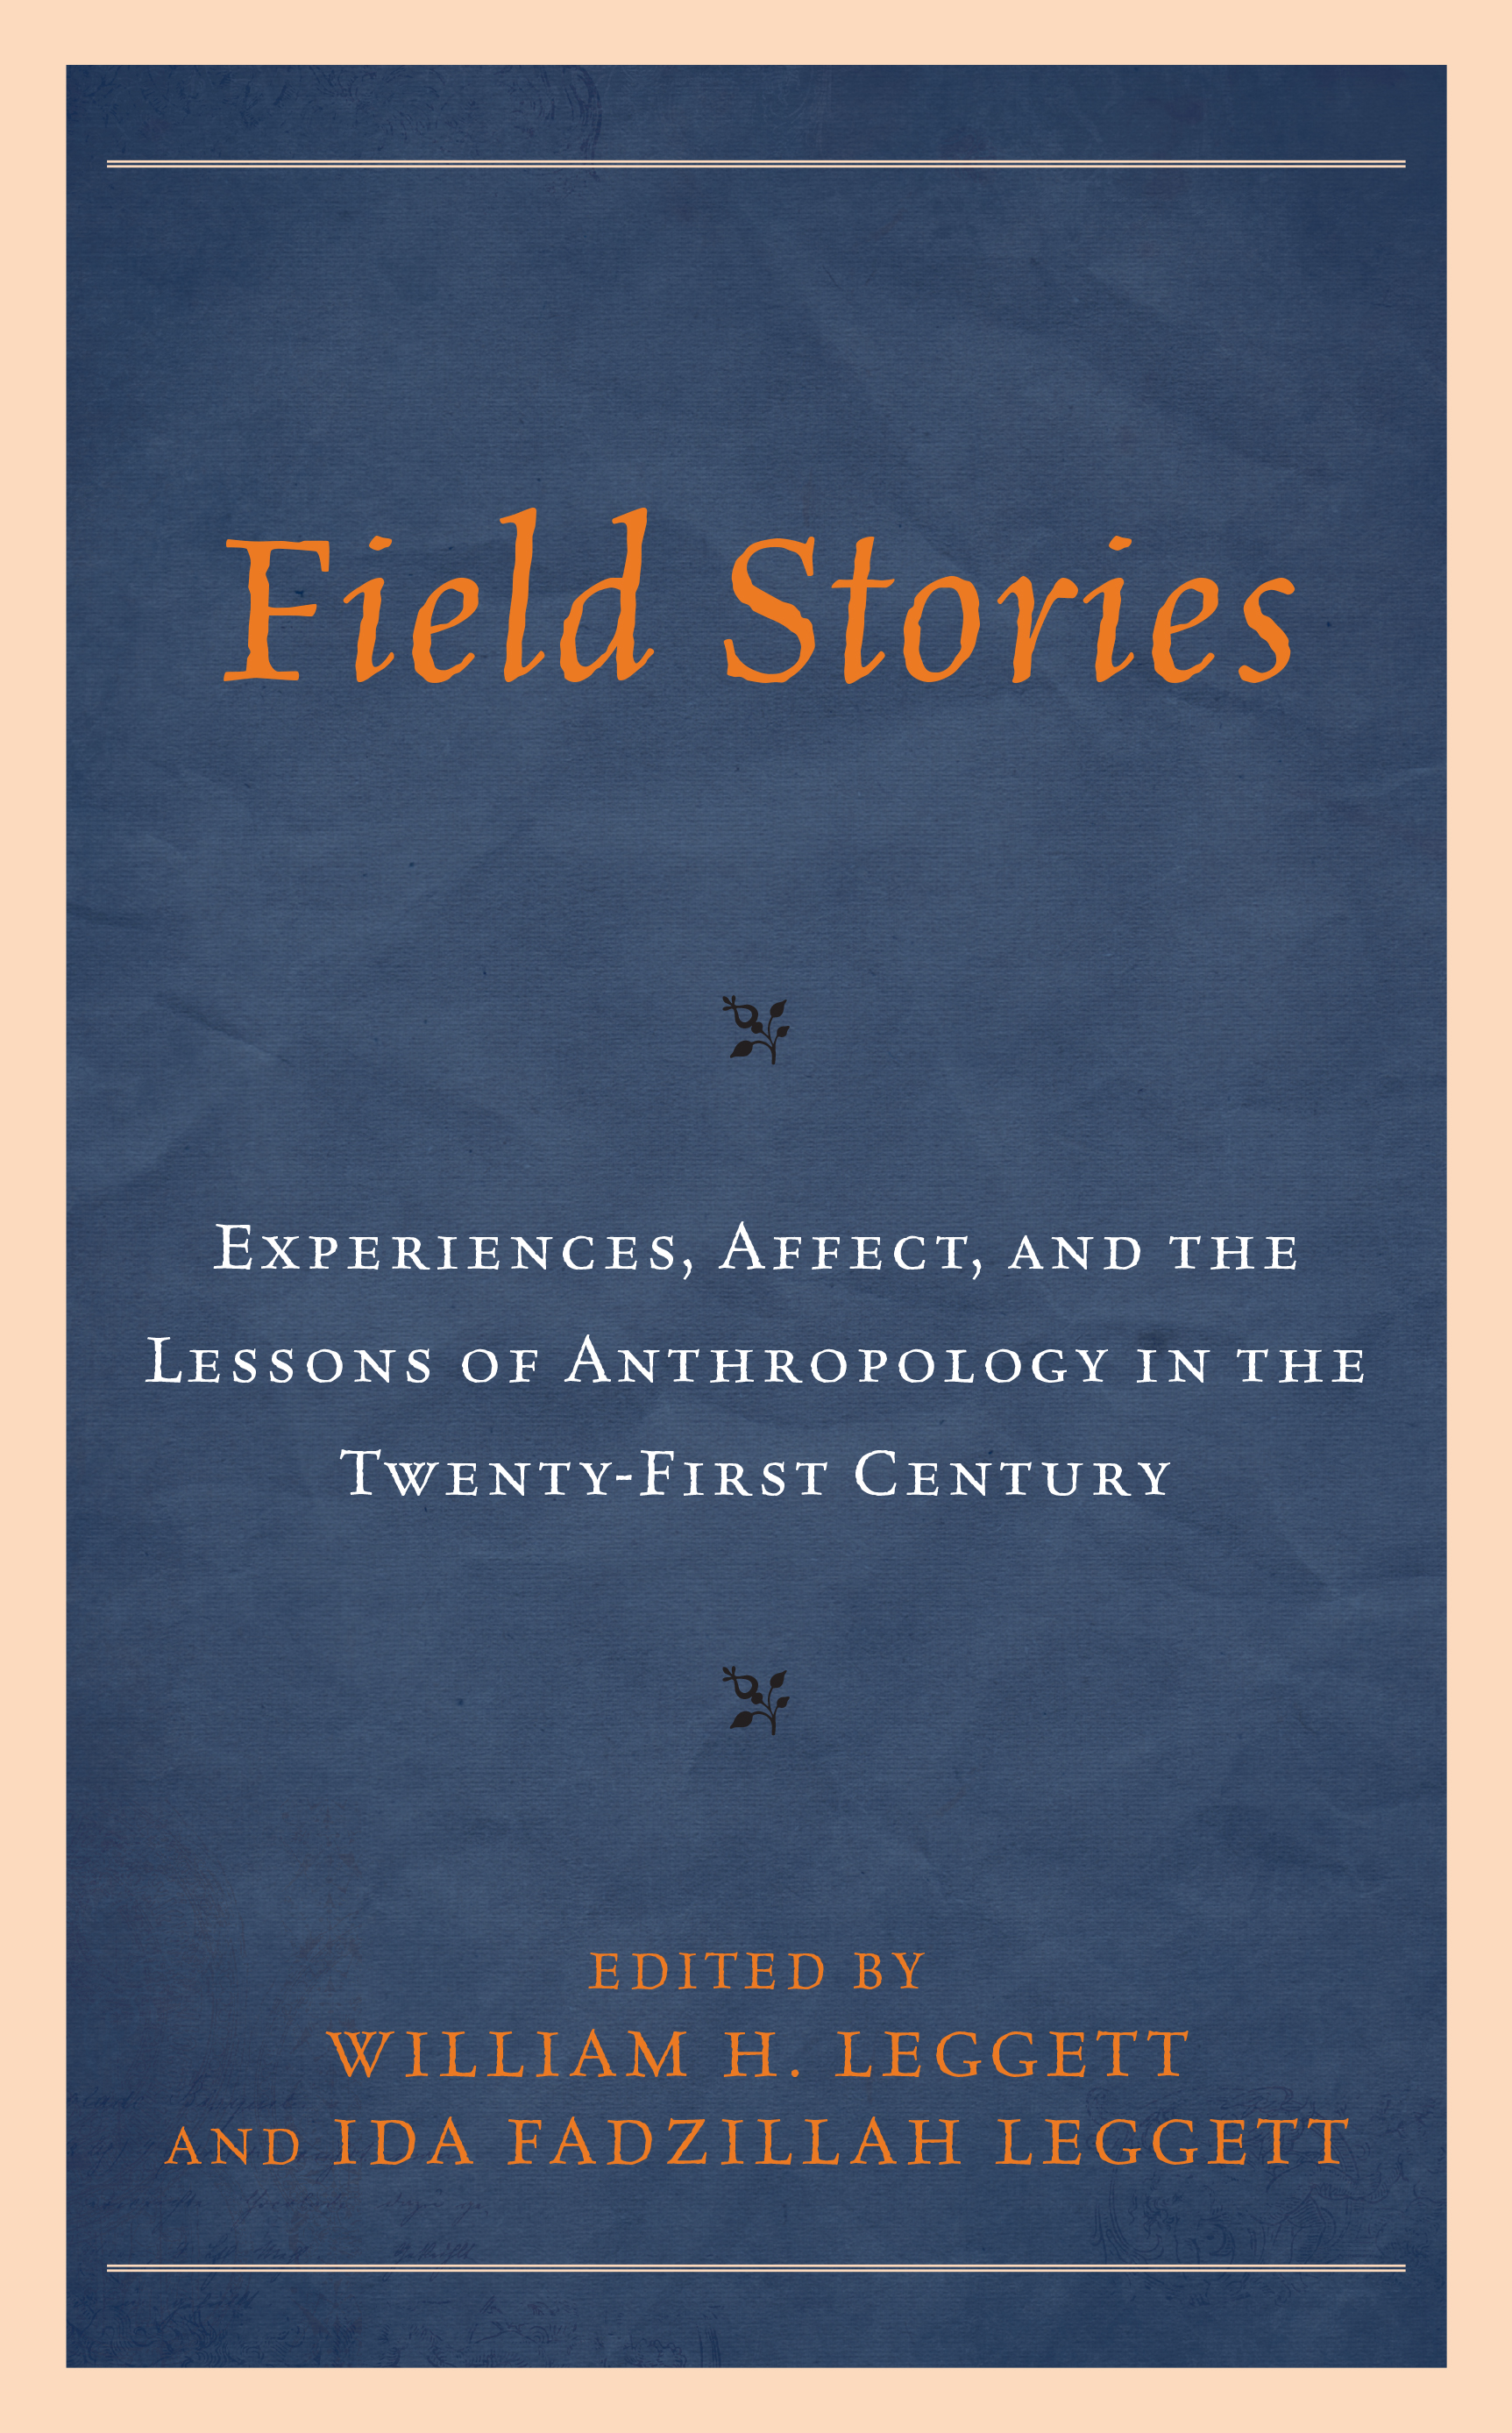 Field Stories: Experiences, Affect, and the Lessons of Anthropology in the Twenty-First Century